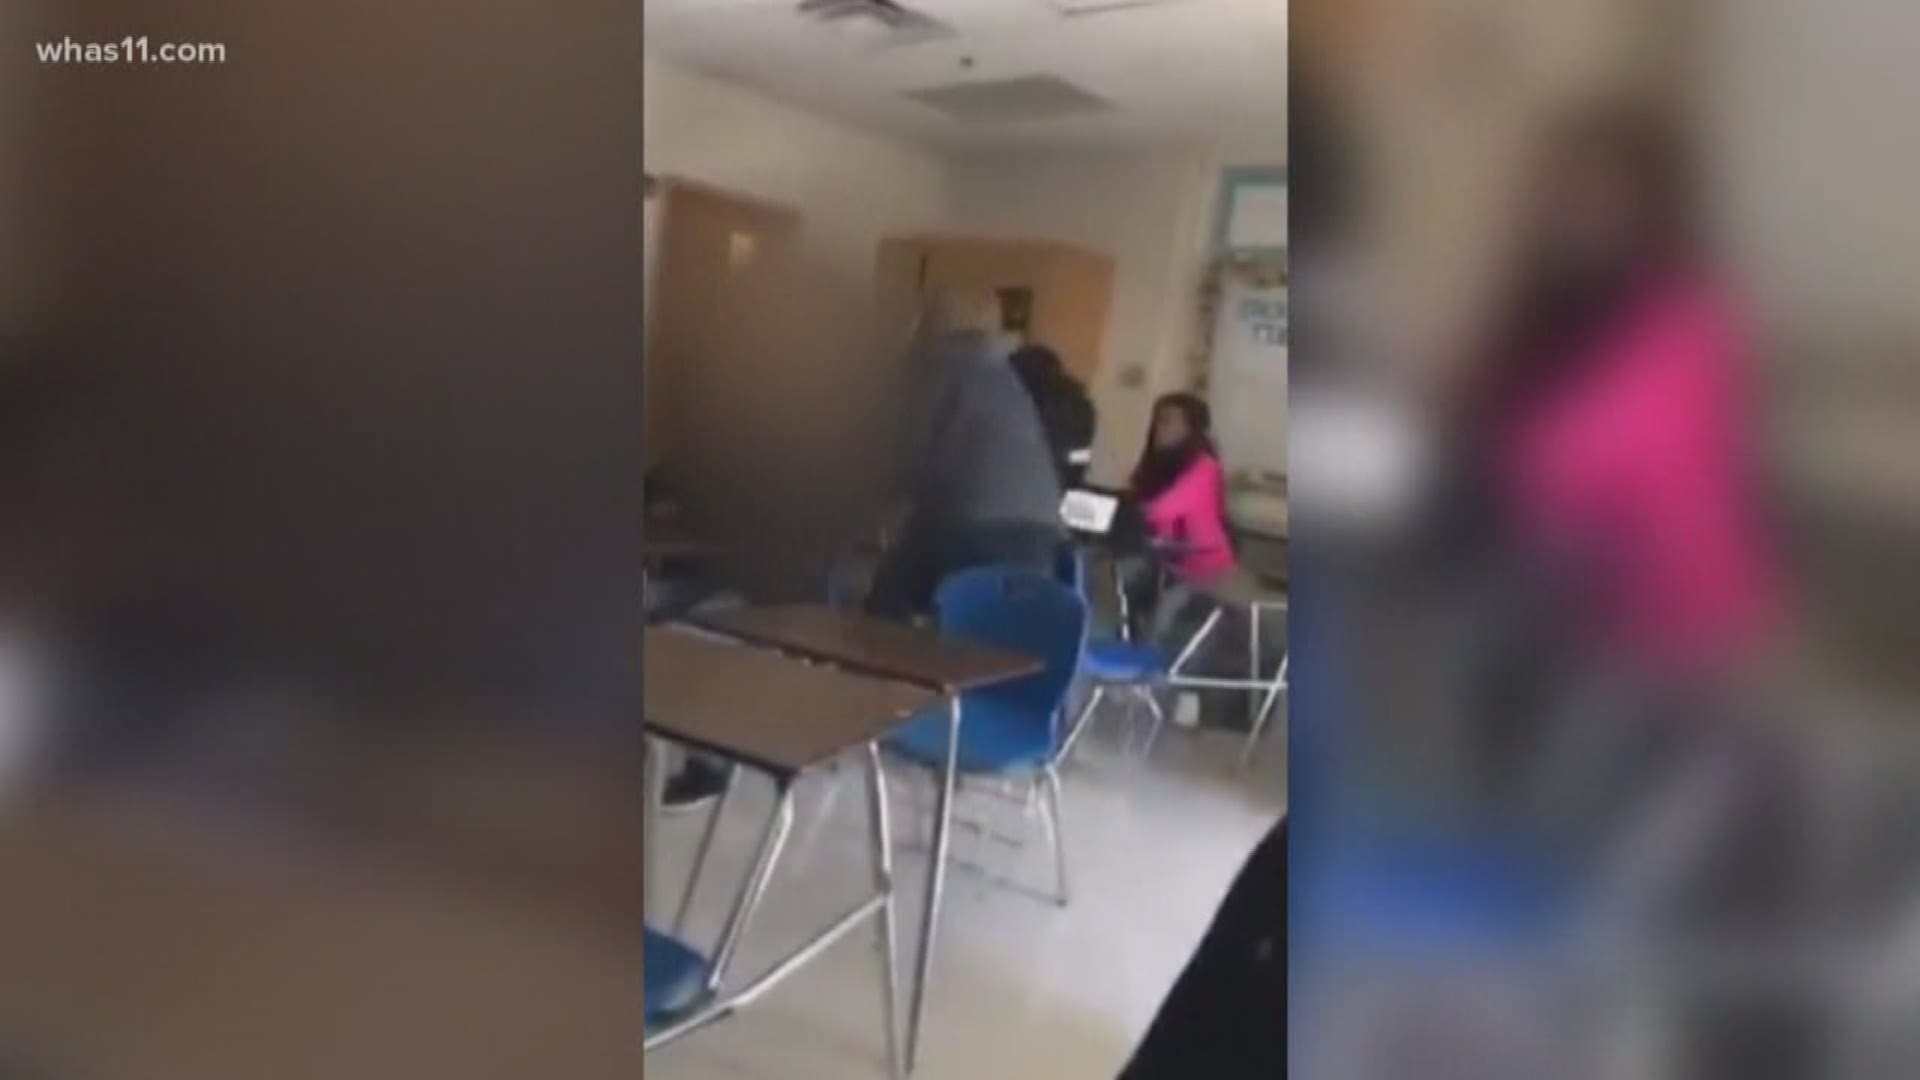 Officials with Jefferson County Public Schools are investigating after a student and teacher fought inside a classroom.